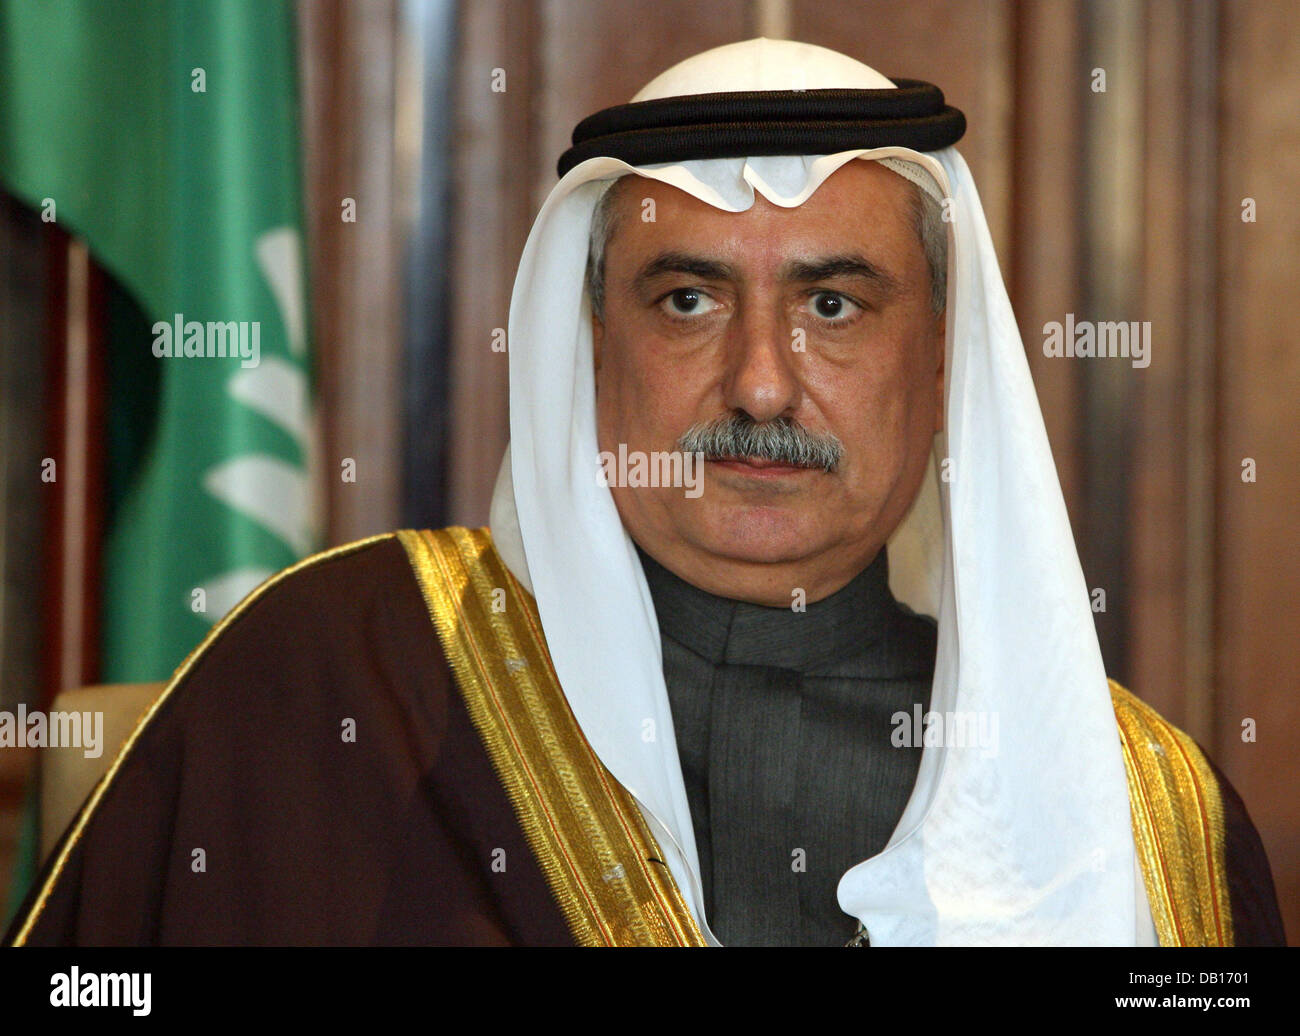 Ibrahim bin Abdulaziz bin Abdullah Al-Assaf Minister of Finance of Saudi Arabia is pictured at the signing of contracts against double taxation in Berlin, Germany, 8 November 2007. The Saudi king visits Germany for three days. Photo: TIM BRAKEMEIER Stock Photo